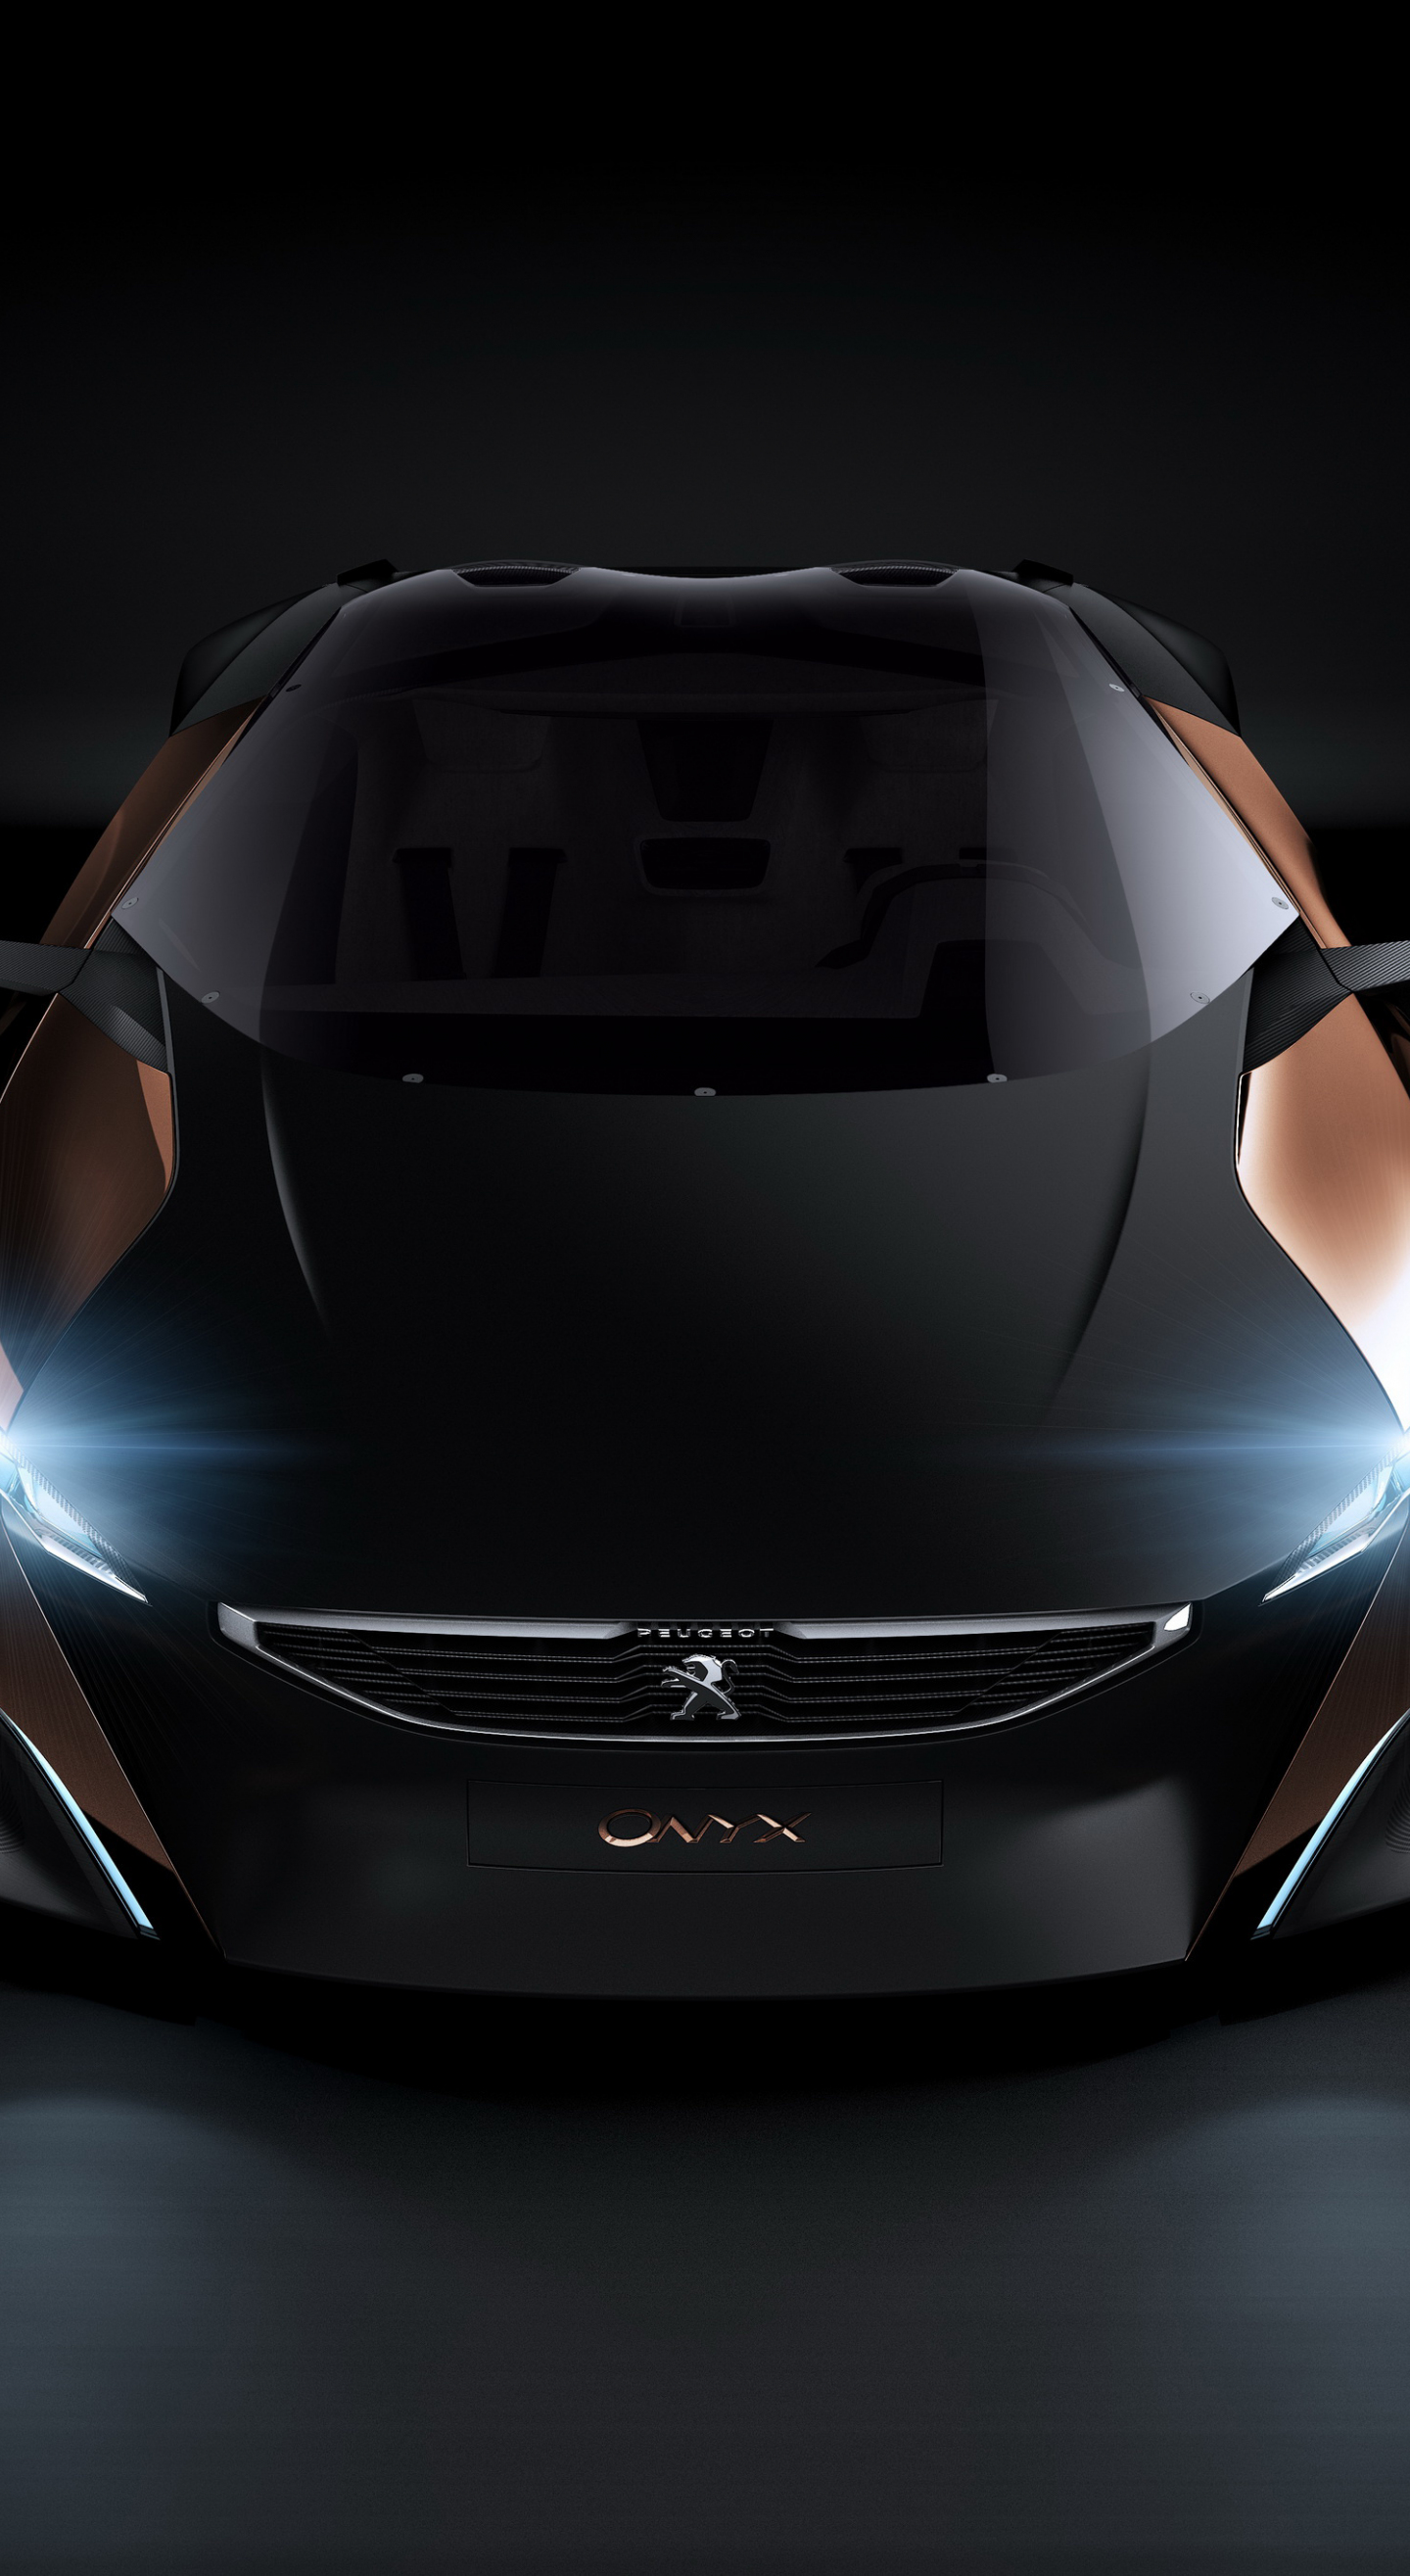 Download peugeot onyx concept, front 1440x2630 wallpaper, samsung galaxy note 1440x2630 HD image, background, 15468